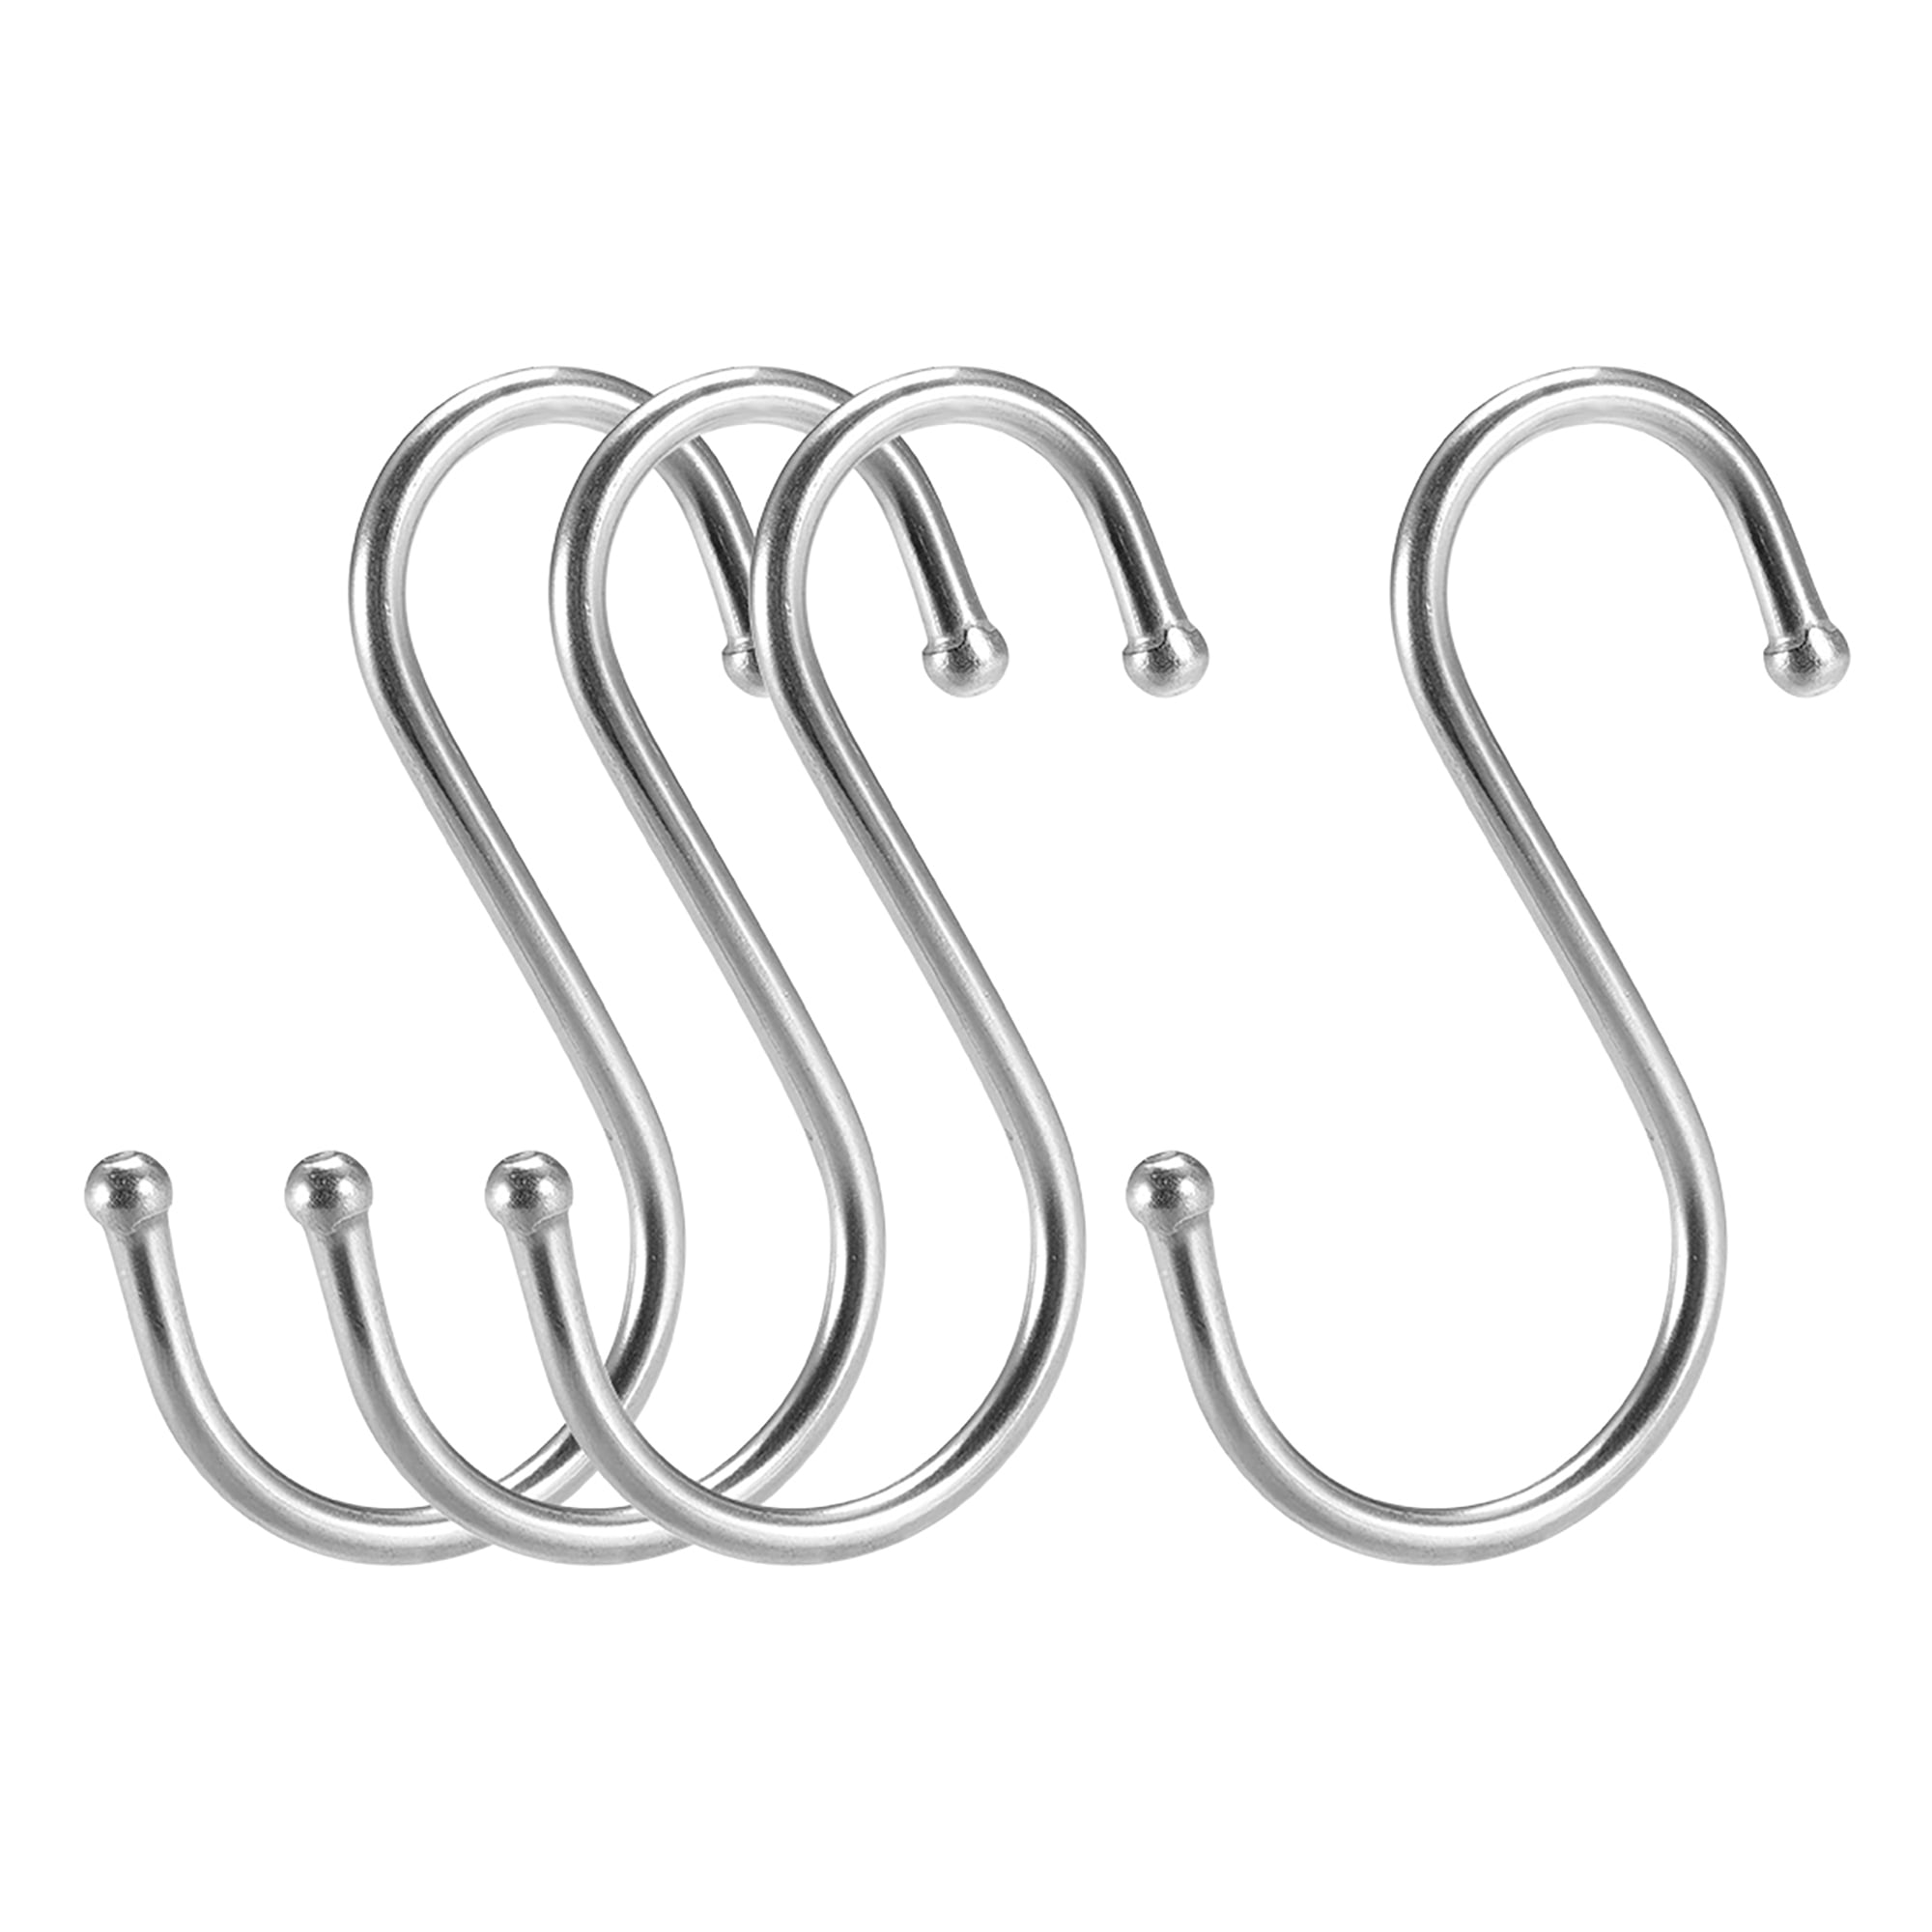 Stainless Steel S Hooks Multifunction Utility Hangers for Kitchen Bedroom Bathroom Office, S, M, L LINVINC 10-30 Pack S Shaped Hooks Hanging * 5-15 Pieces 